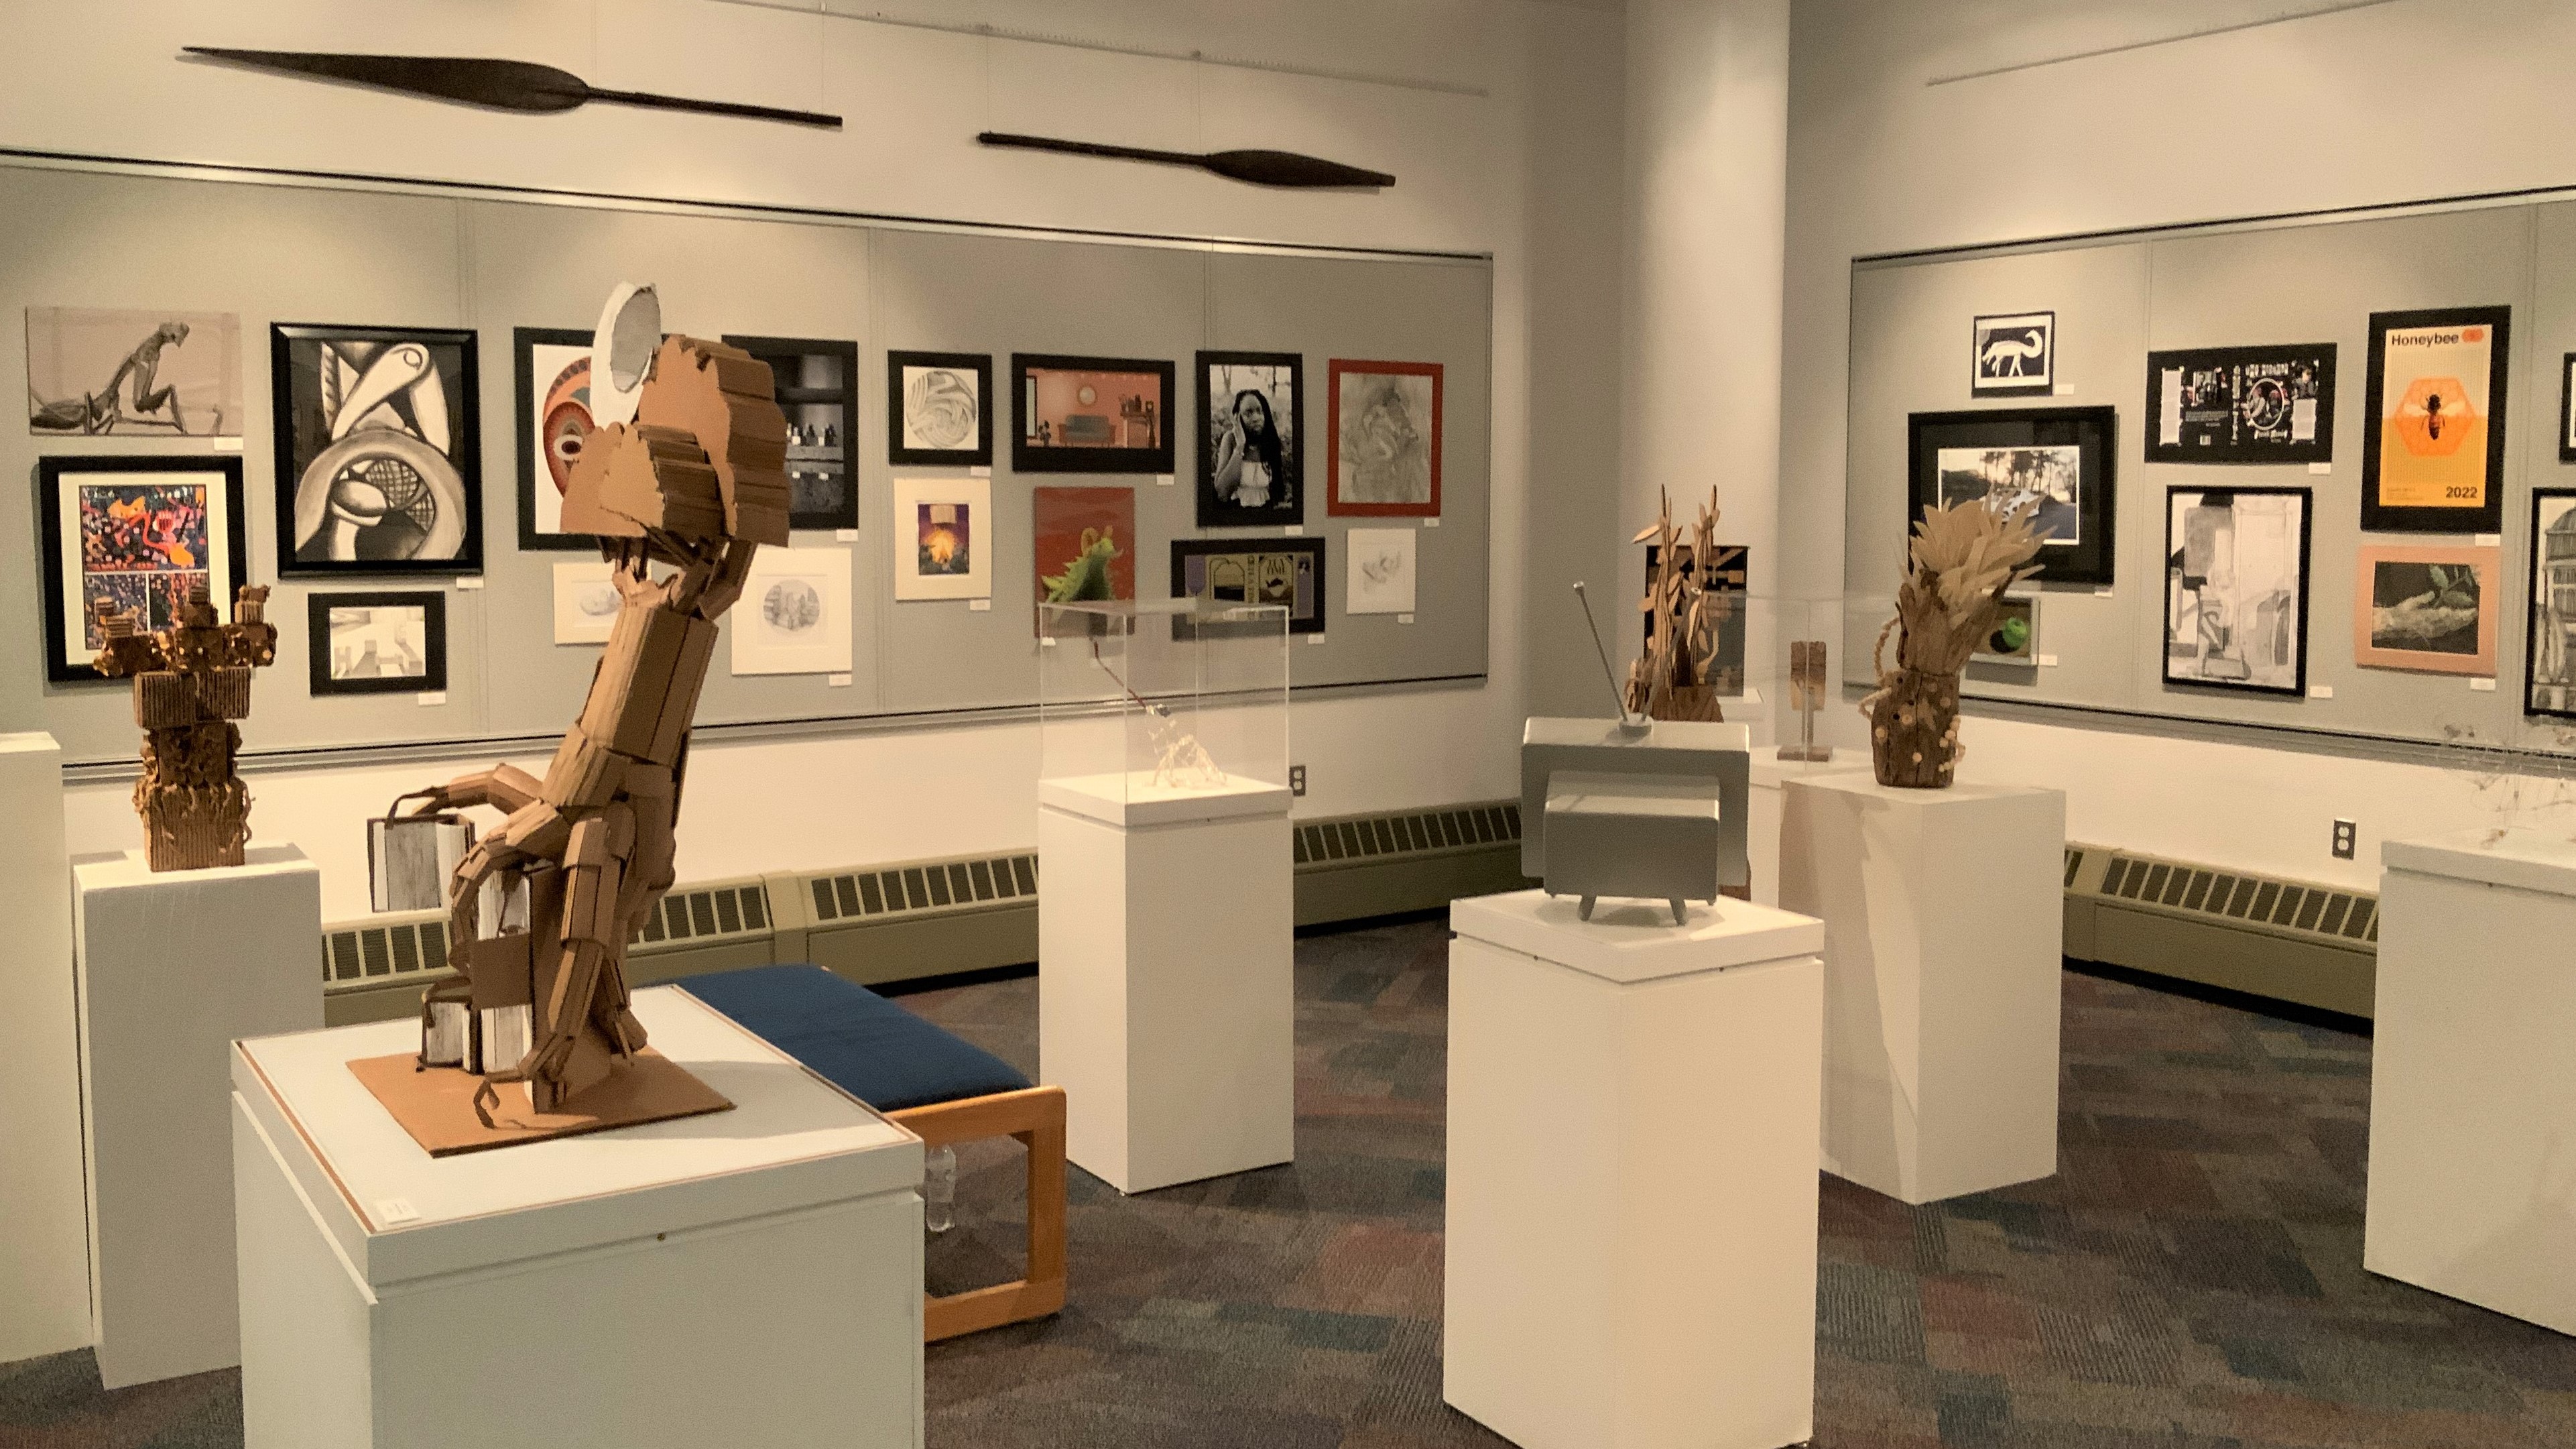 The inside of the James S. Murray Gallery shows students art pieces displayed on pedestals and on the walls.